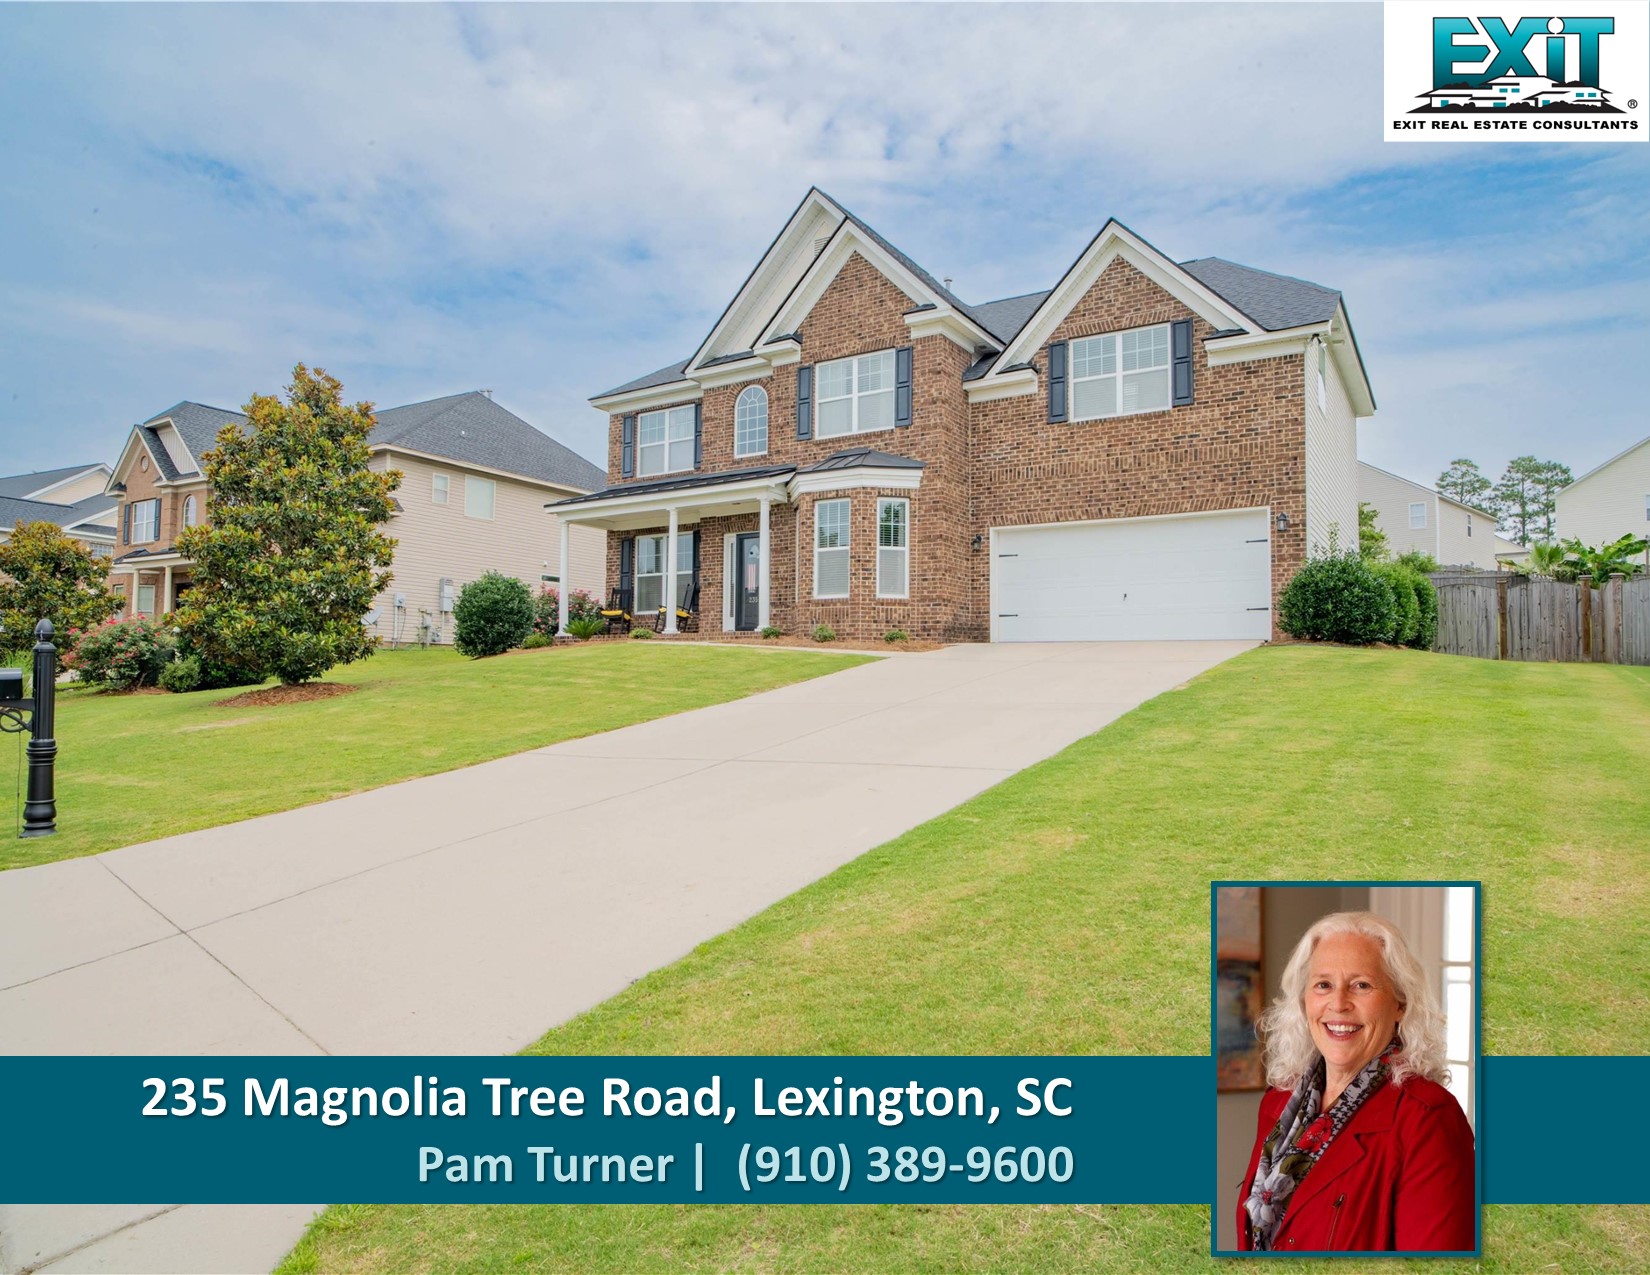 Just listed in Manors at White Knoll - Lexington